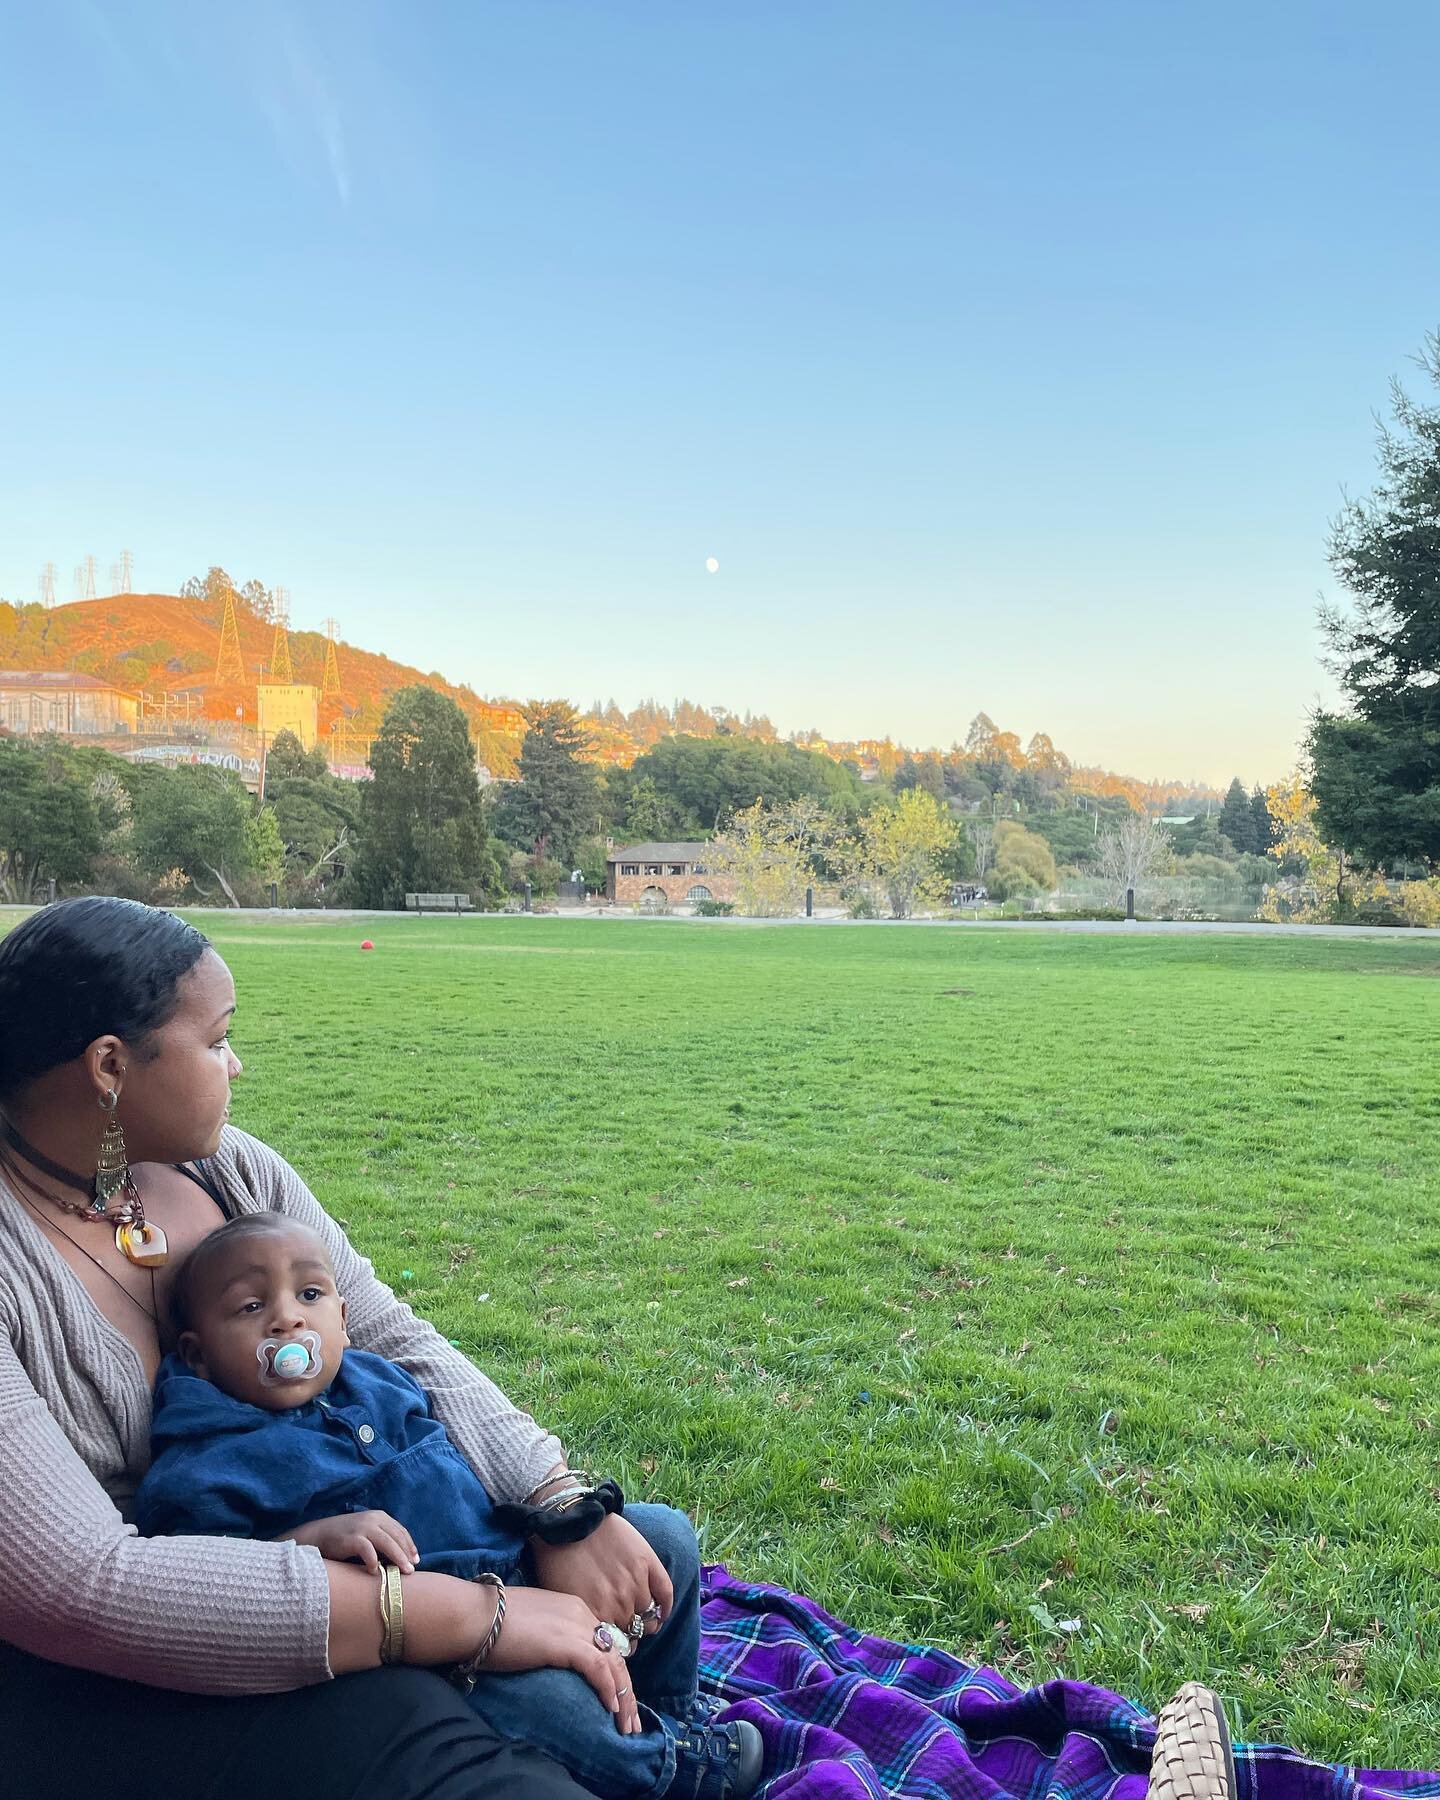 Thankful for @missjubeez for friendship and for capturing this little moment of peace. It&rsquo;s the little things&hellip;

#madewithhellalove